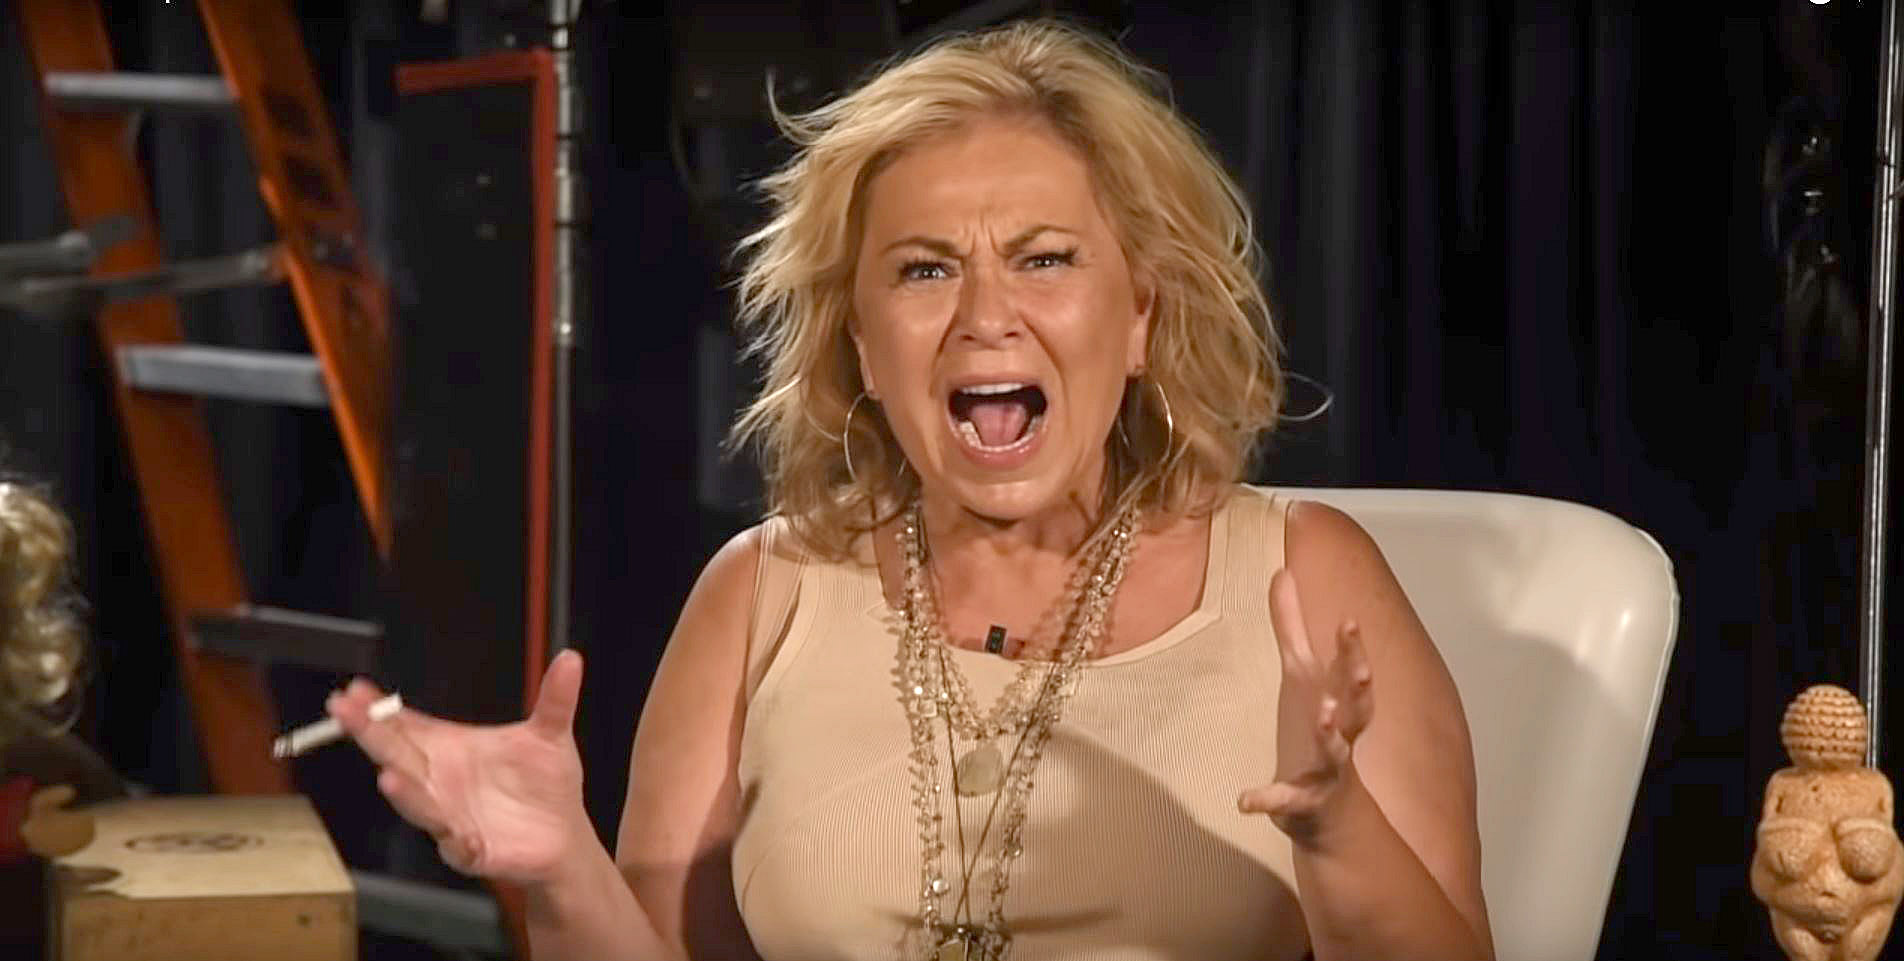 PHOTO: A new video shows Roseanne Barr discussing the racist tweet she posted about a former Obama administration official that prompted the cancellation of her eponymous sitcom.